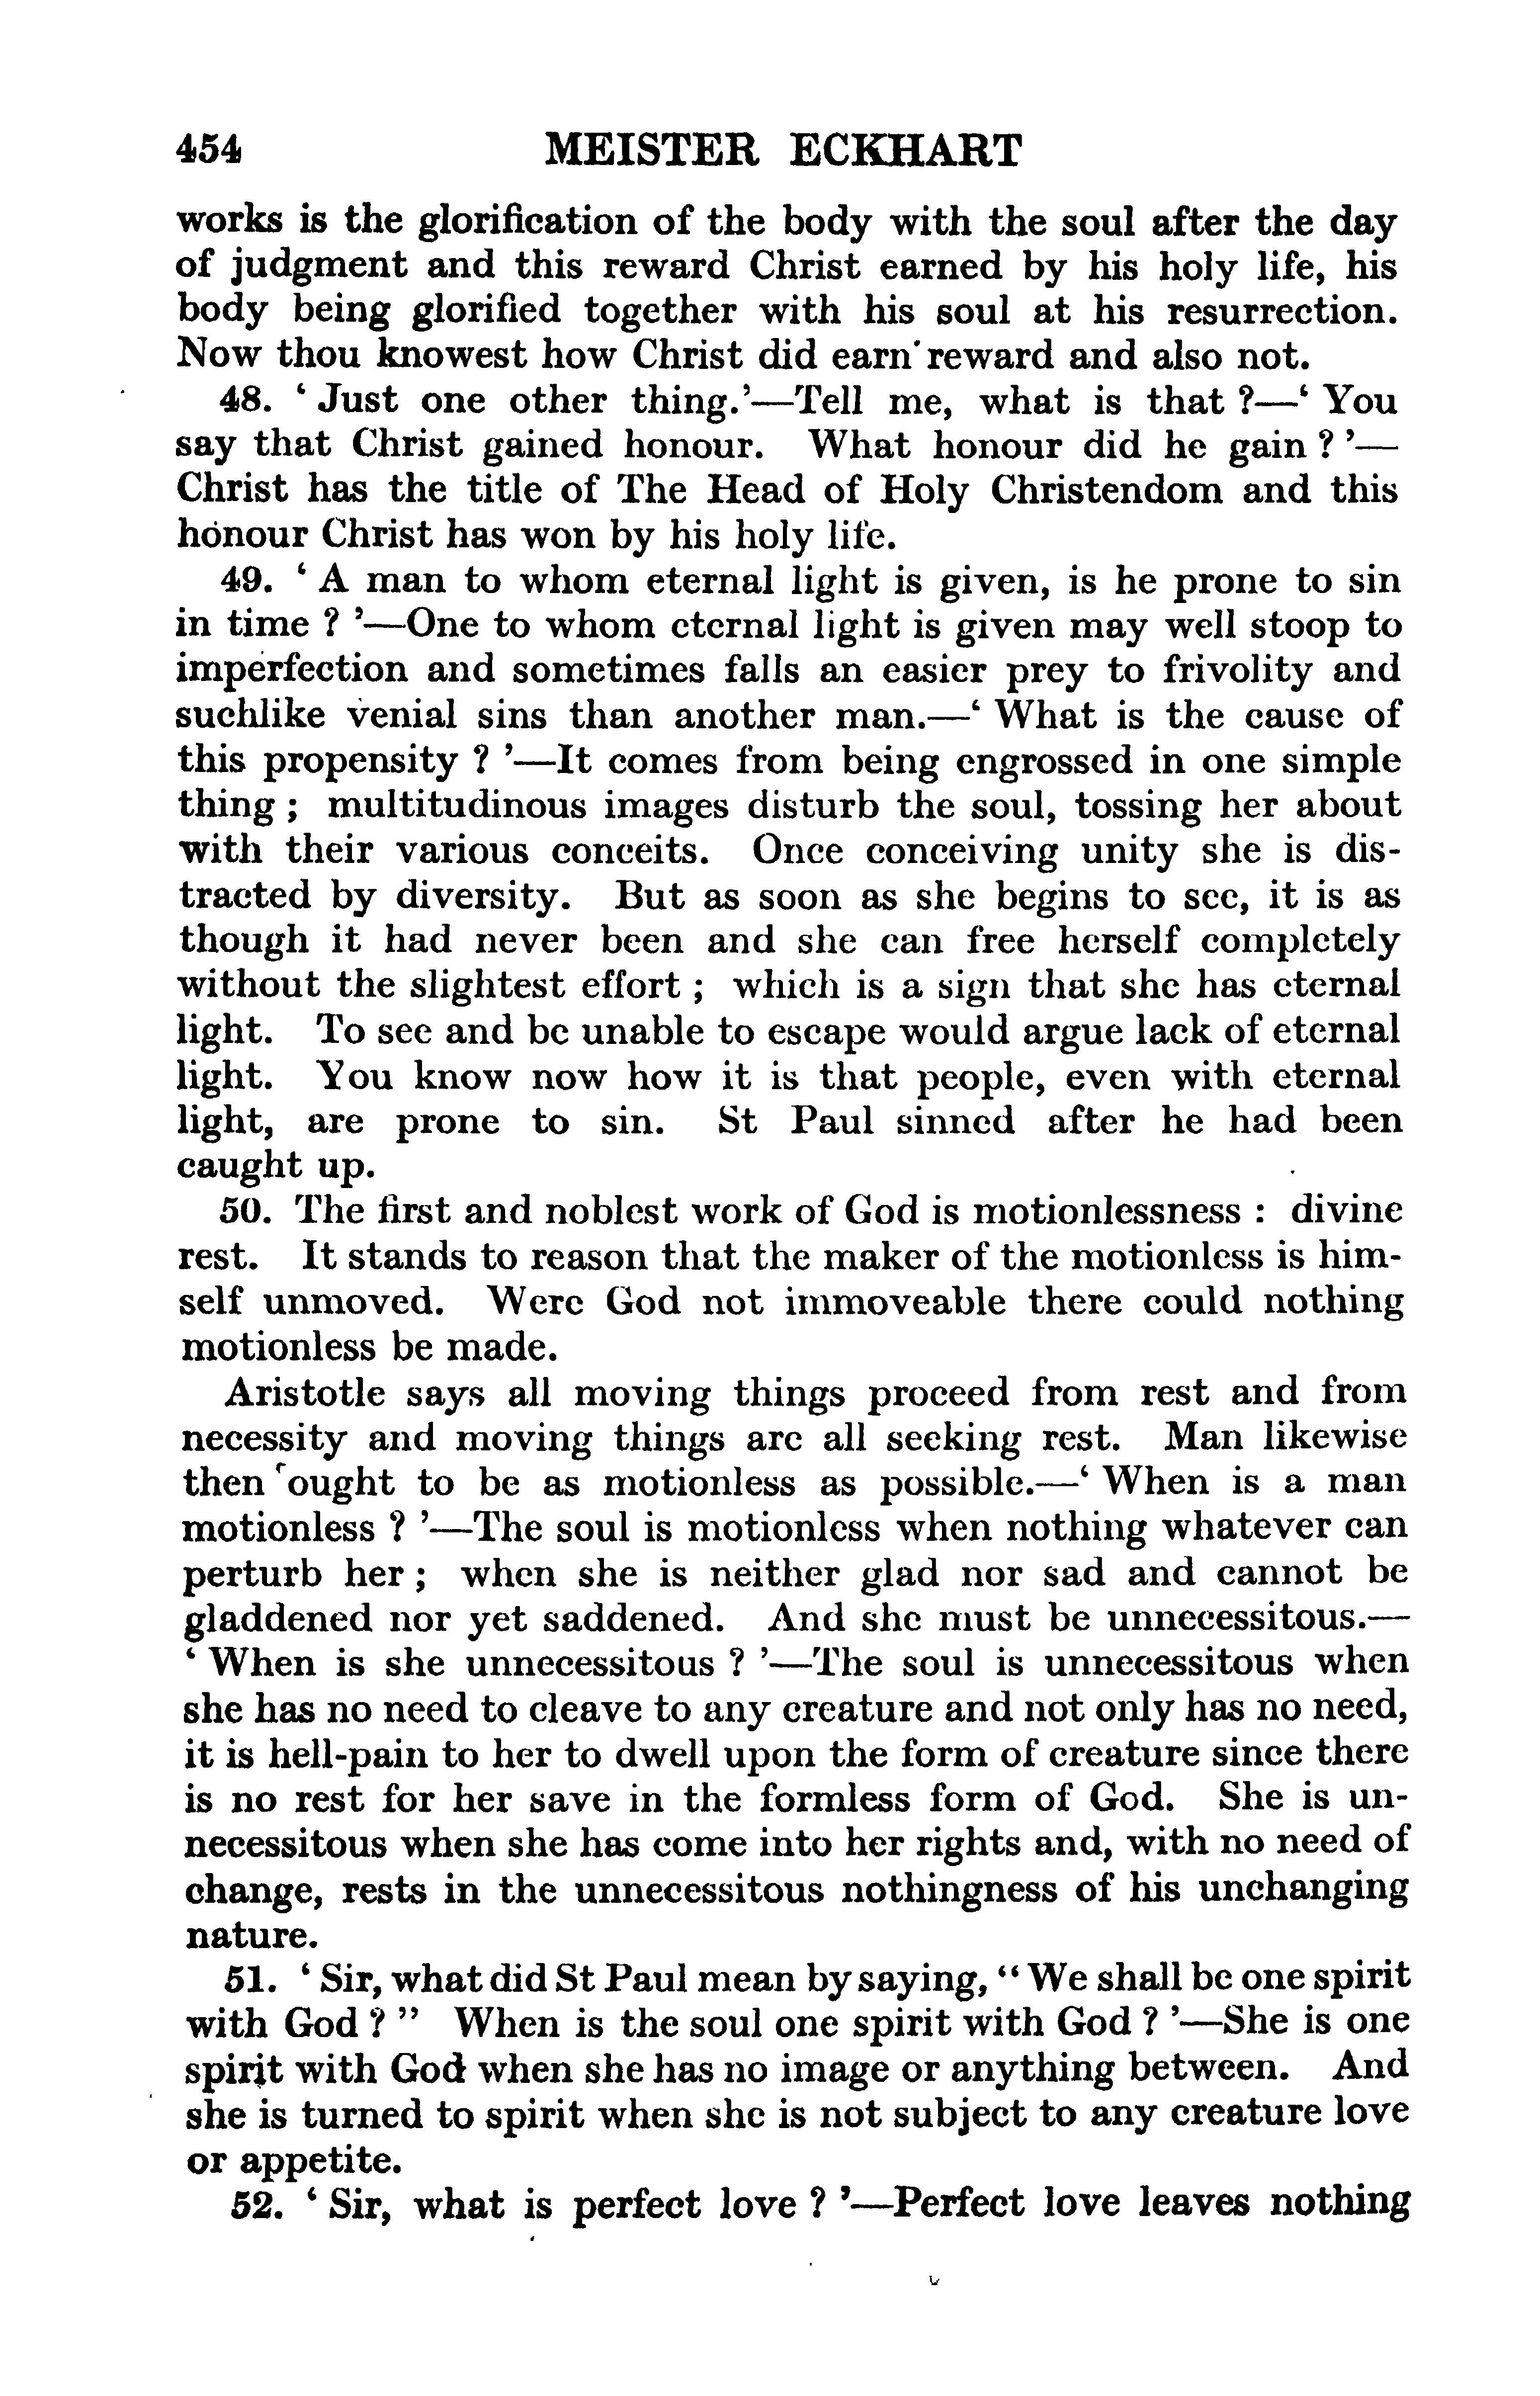 Image of page 0478